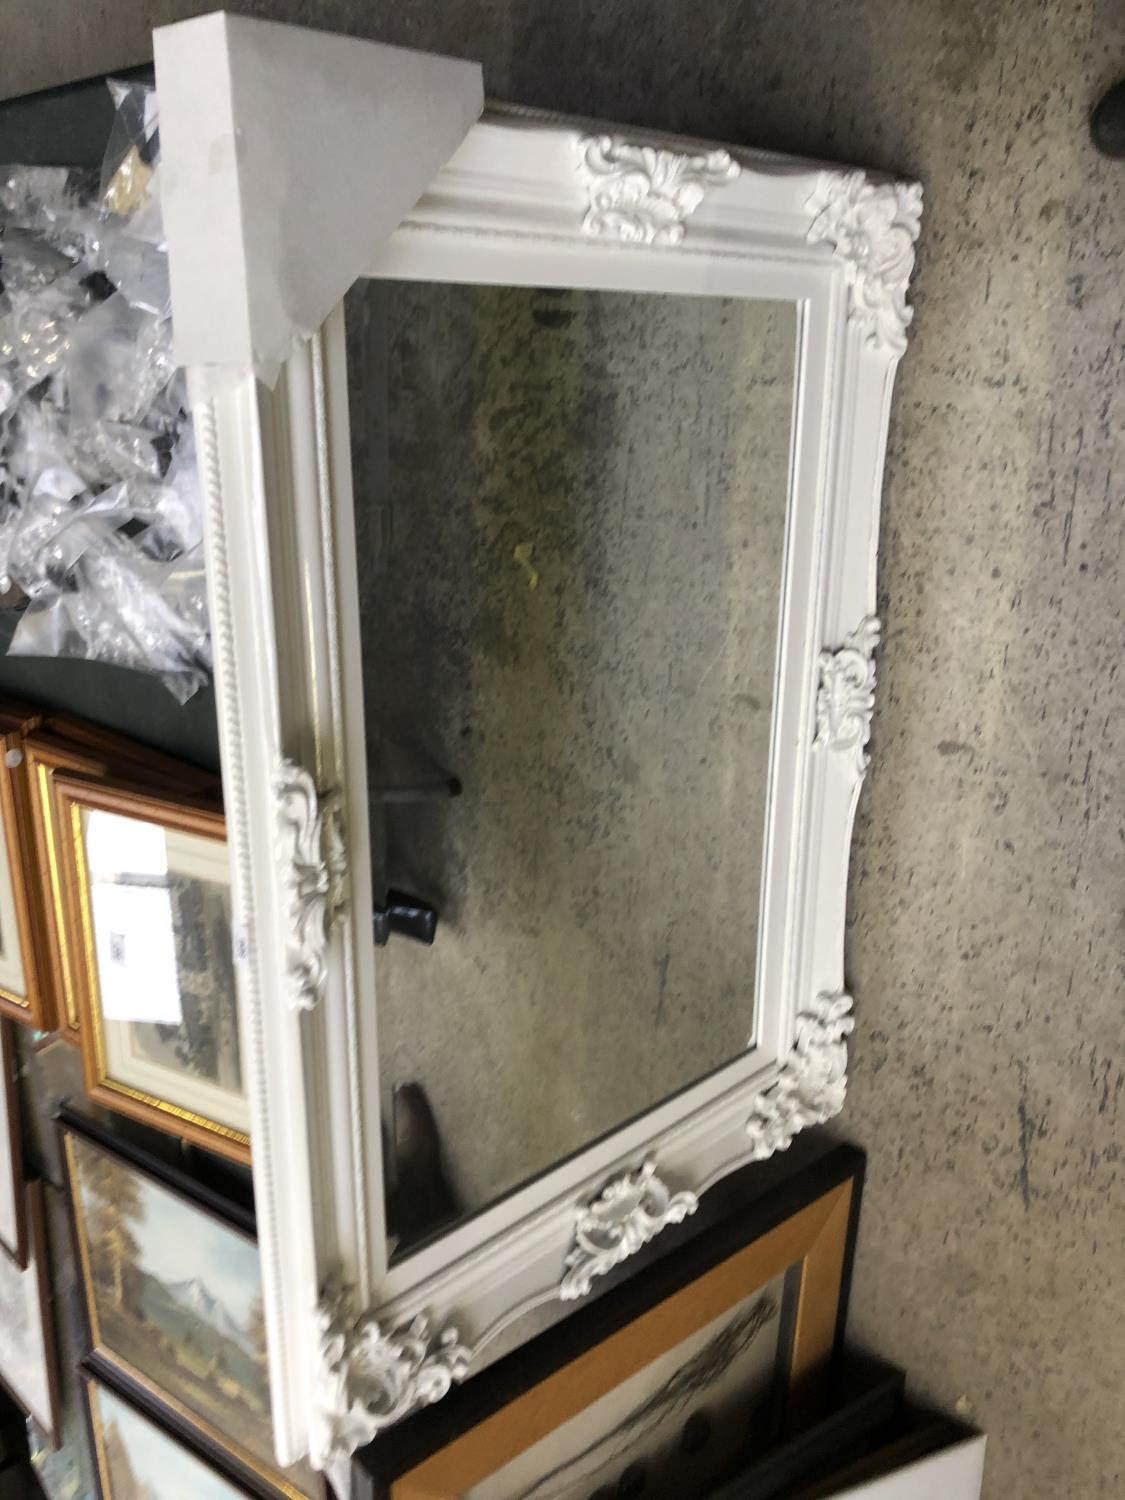 A LARGE WHITE ORNATE MIRROR